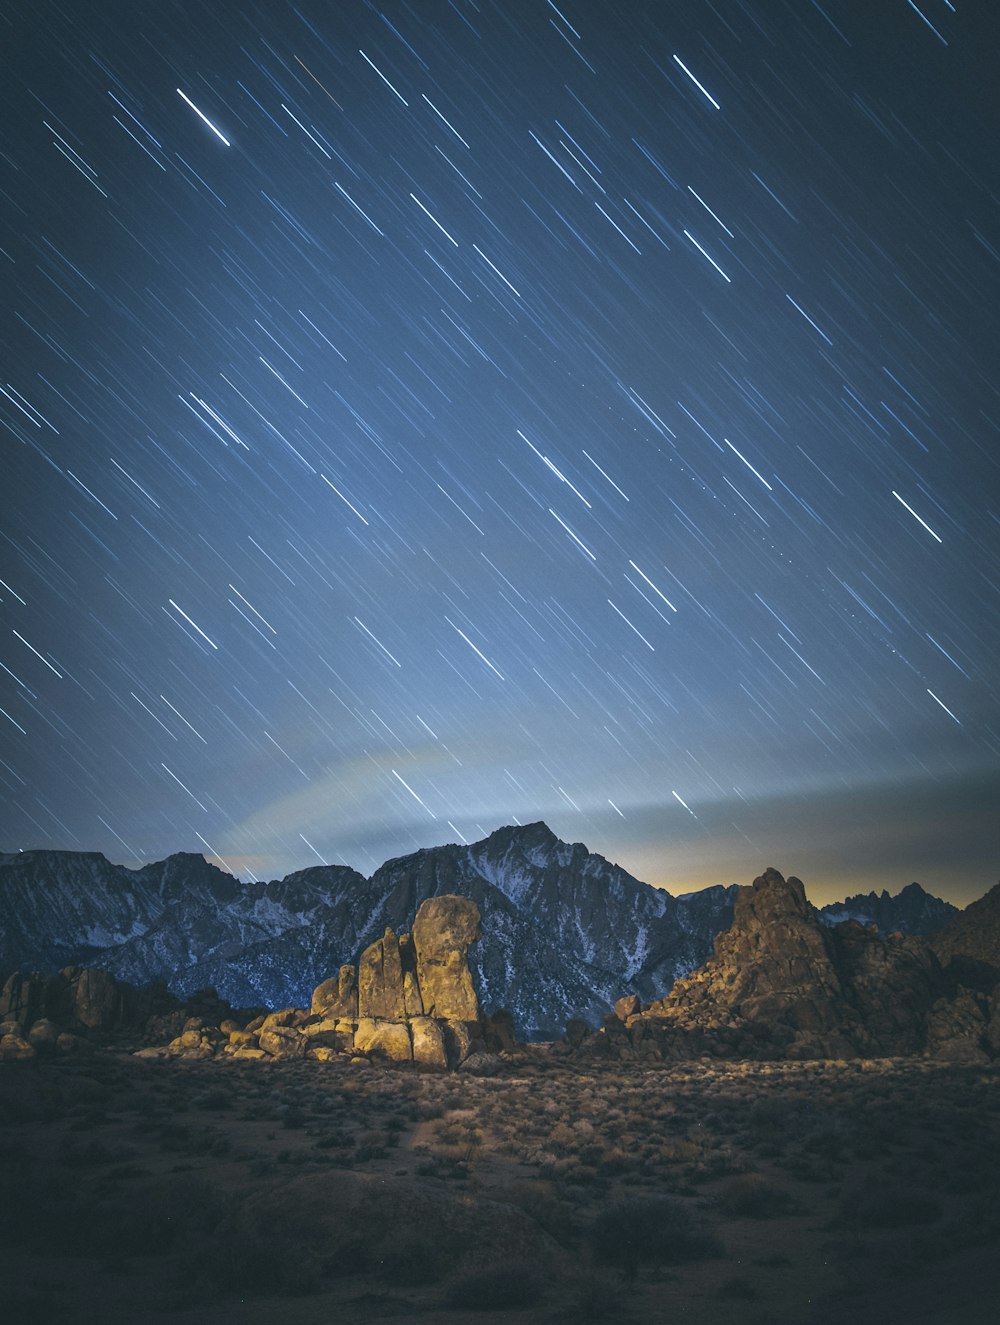 time lapse photography of fault block mountain during nighttime